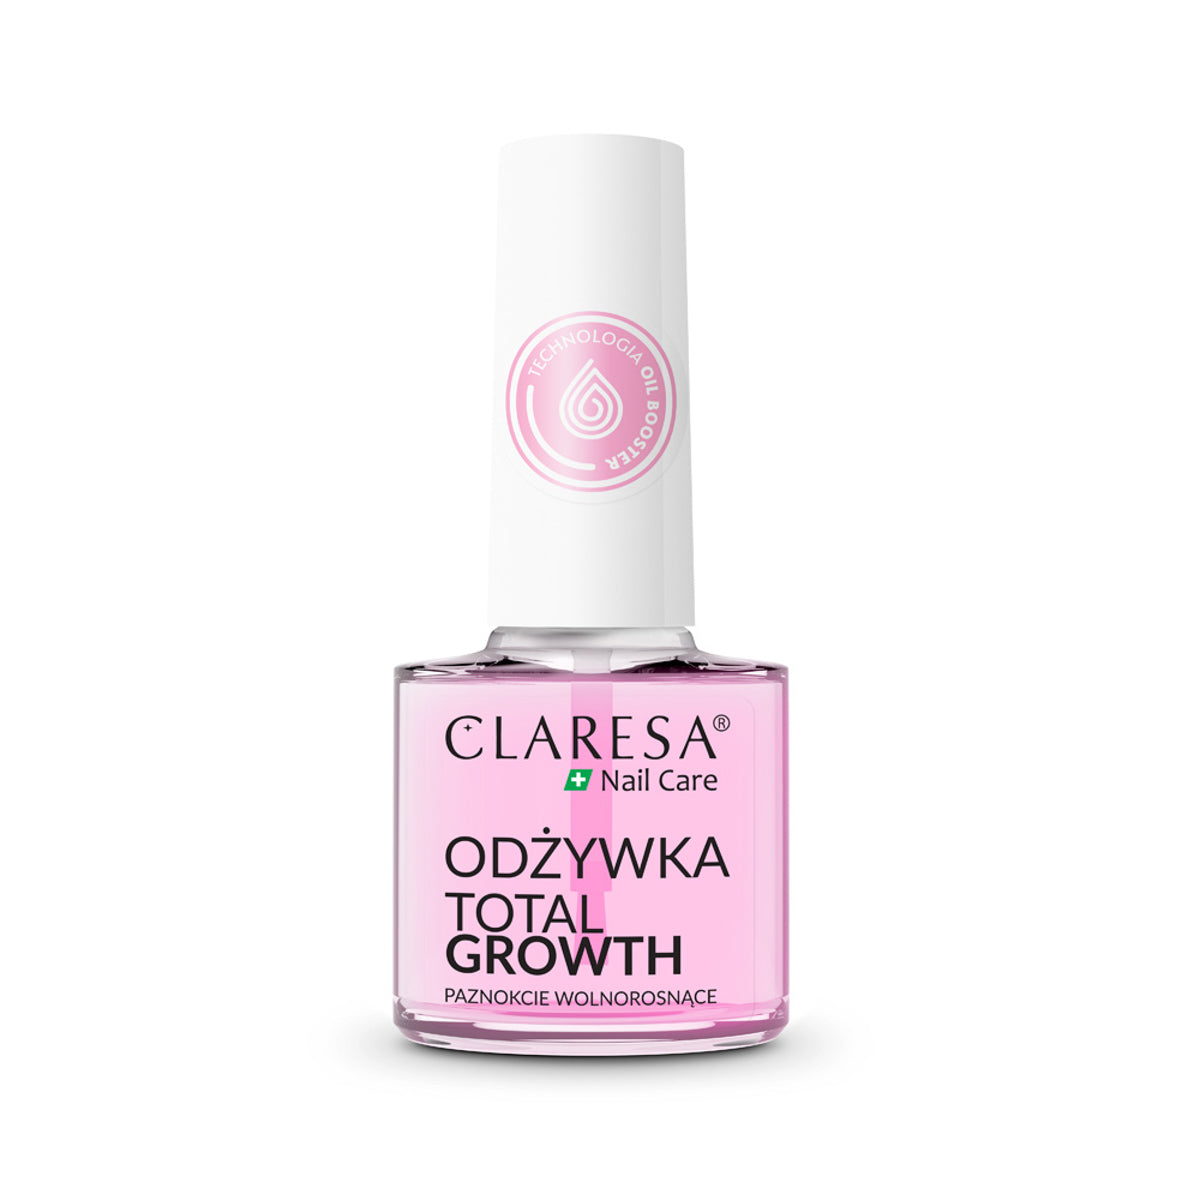 CLARESA Total Growth nail conditioner 5 g